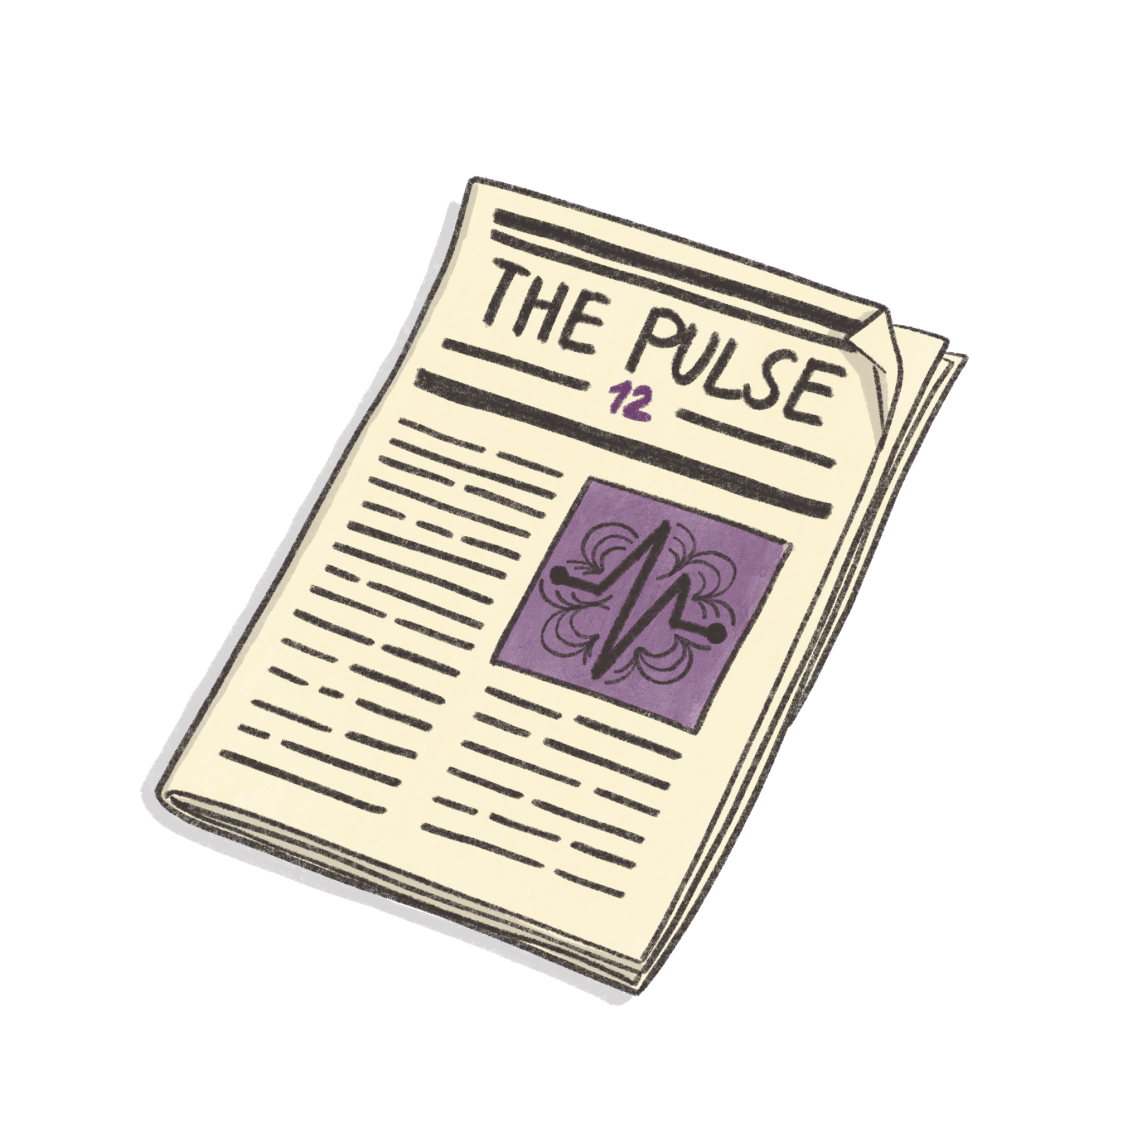 The Apoio Pulse – Issue 12